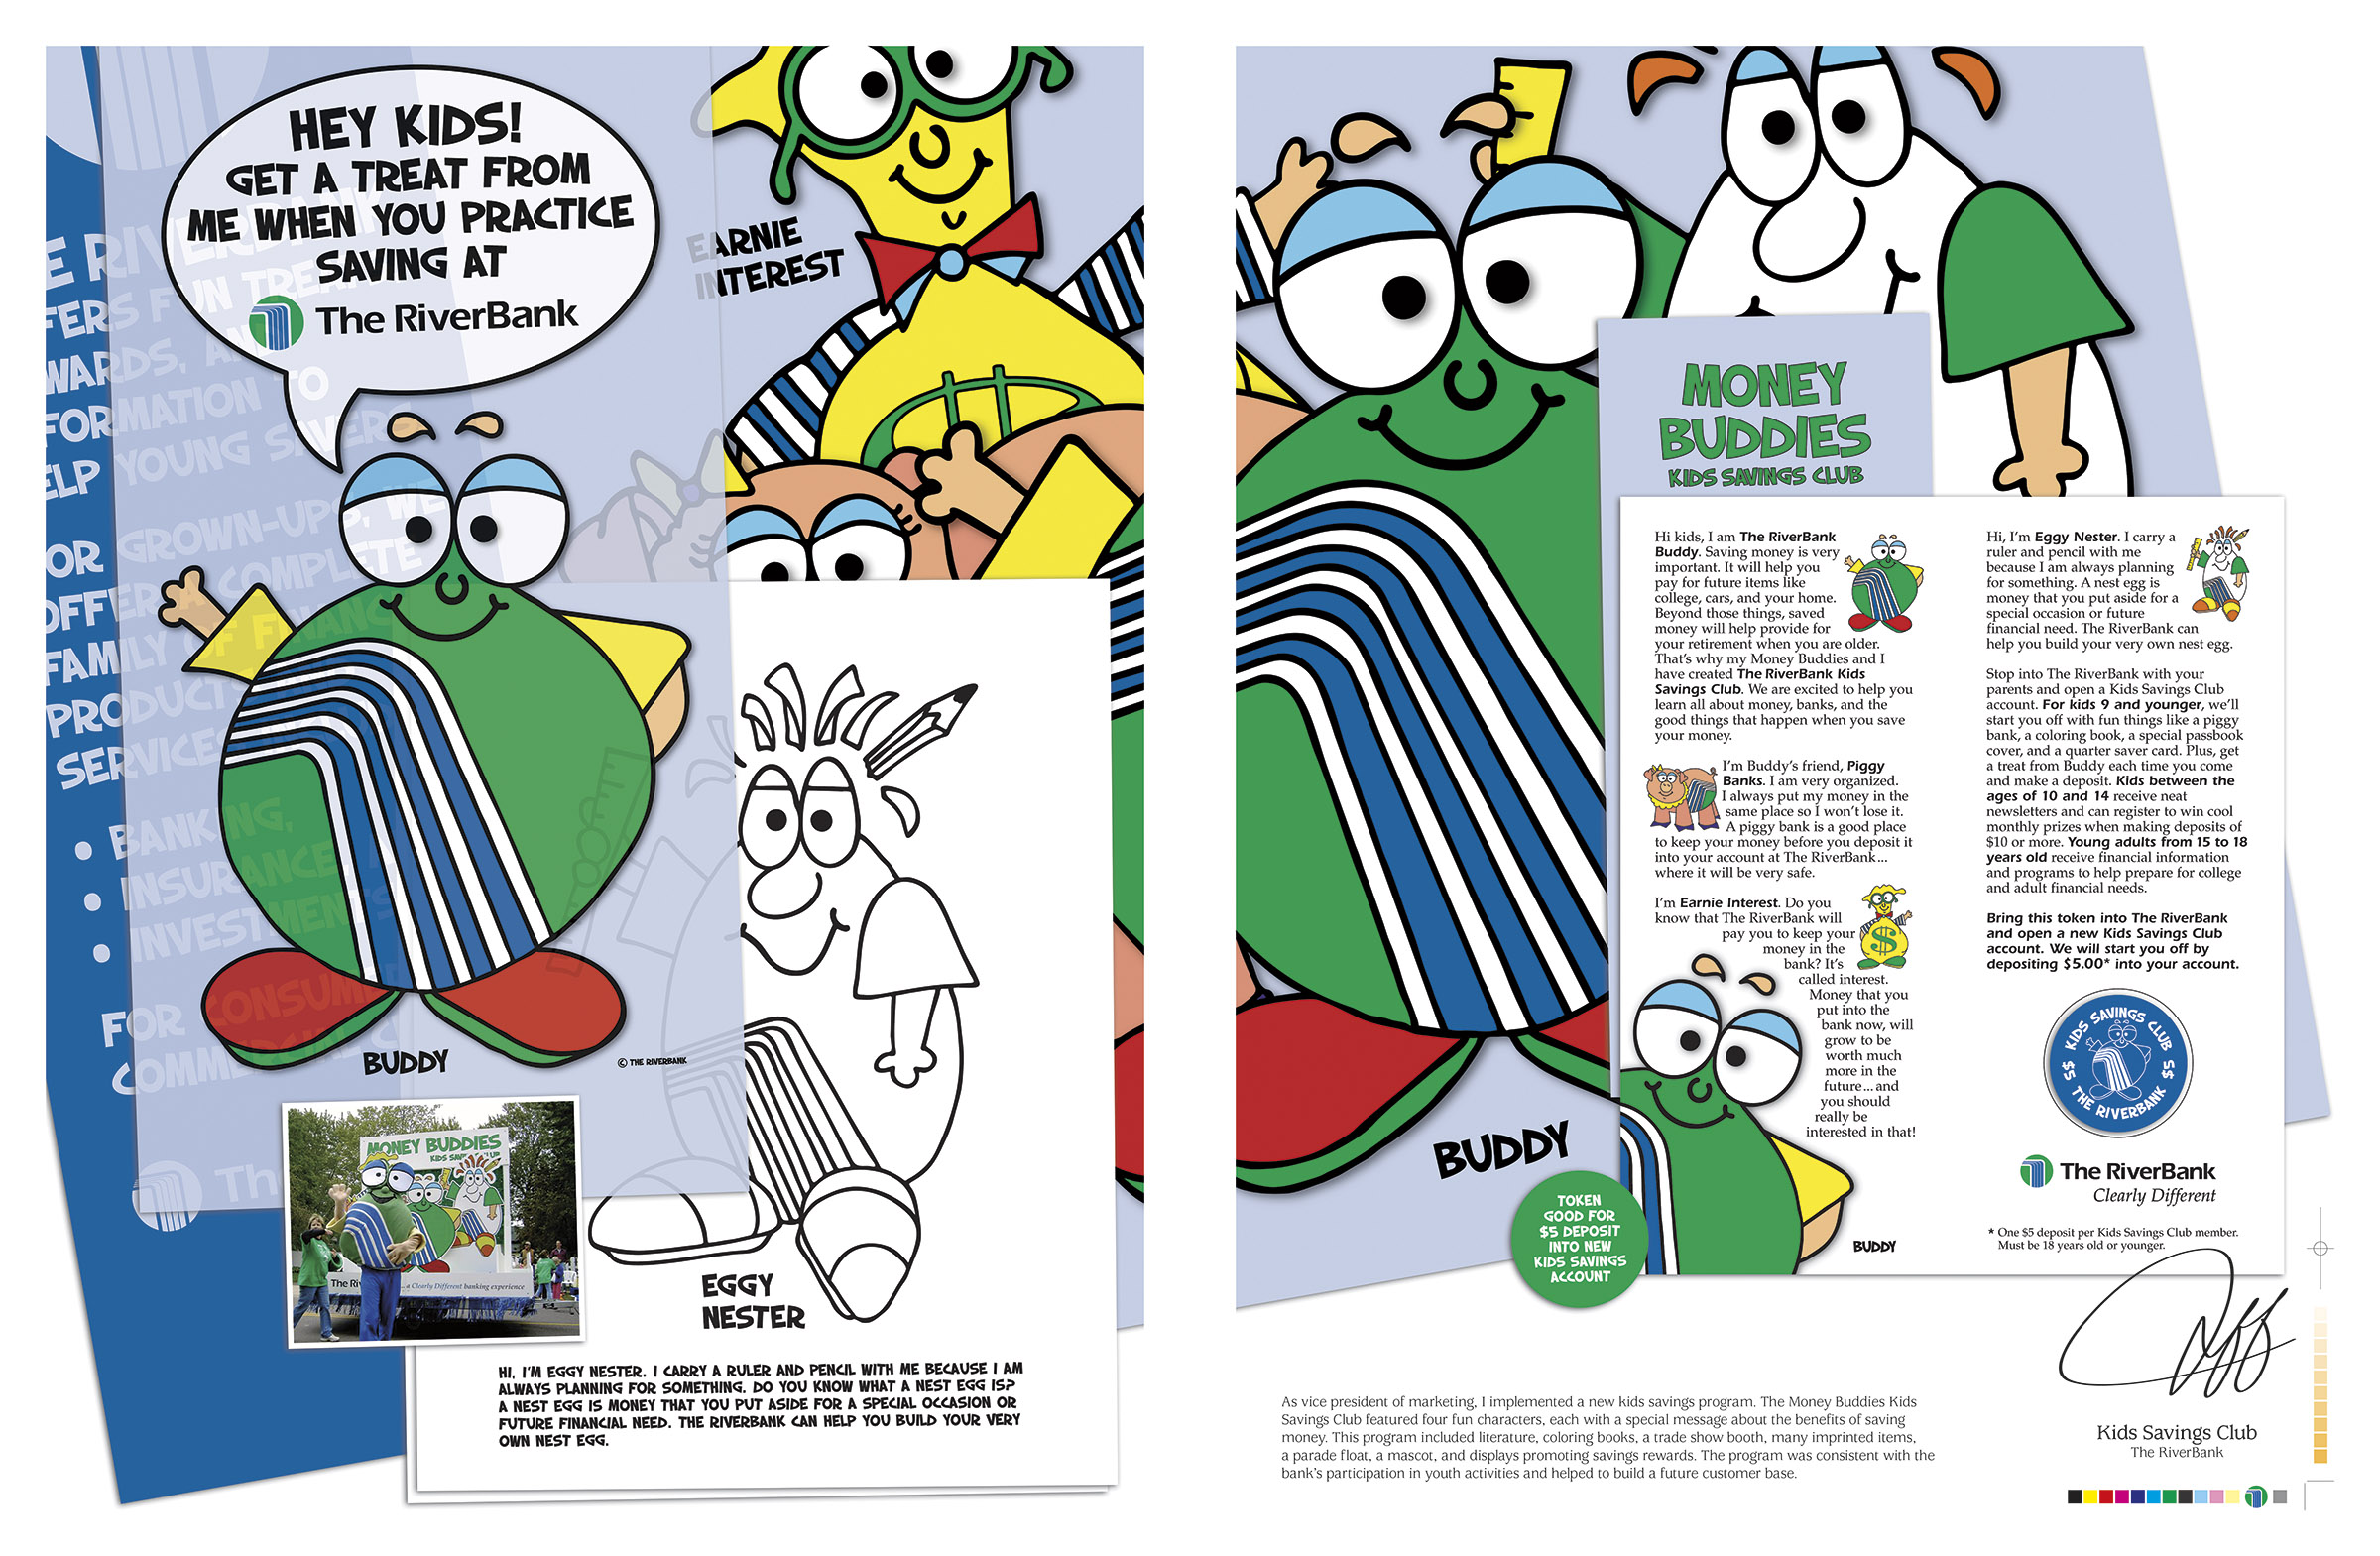 This is the Kids Savings Club spread from Jeff Nelson’s portfolio.